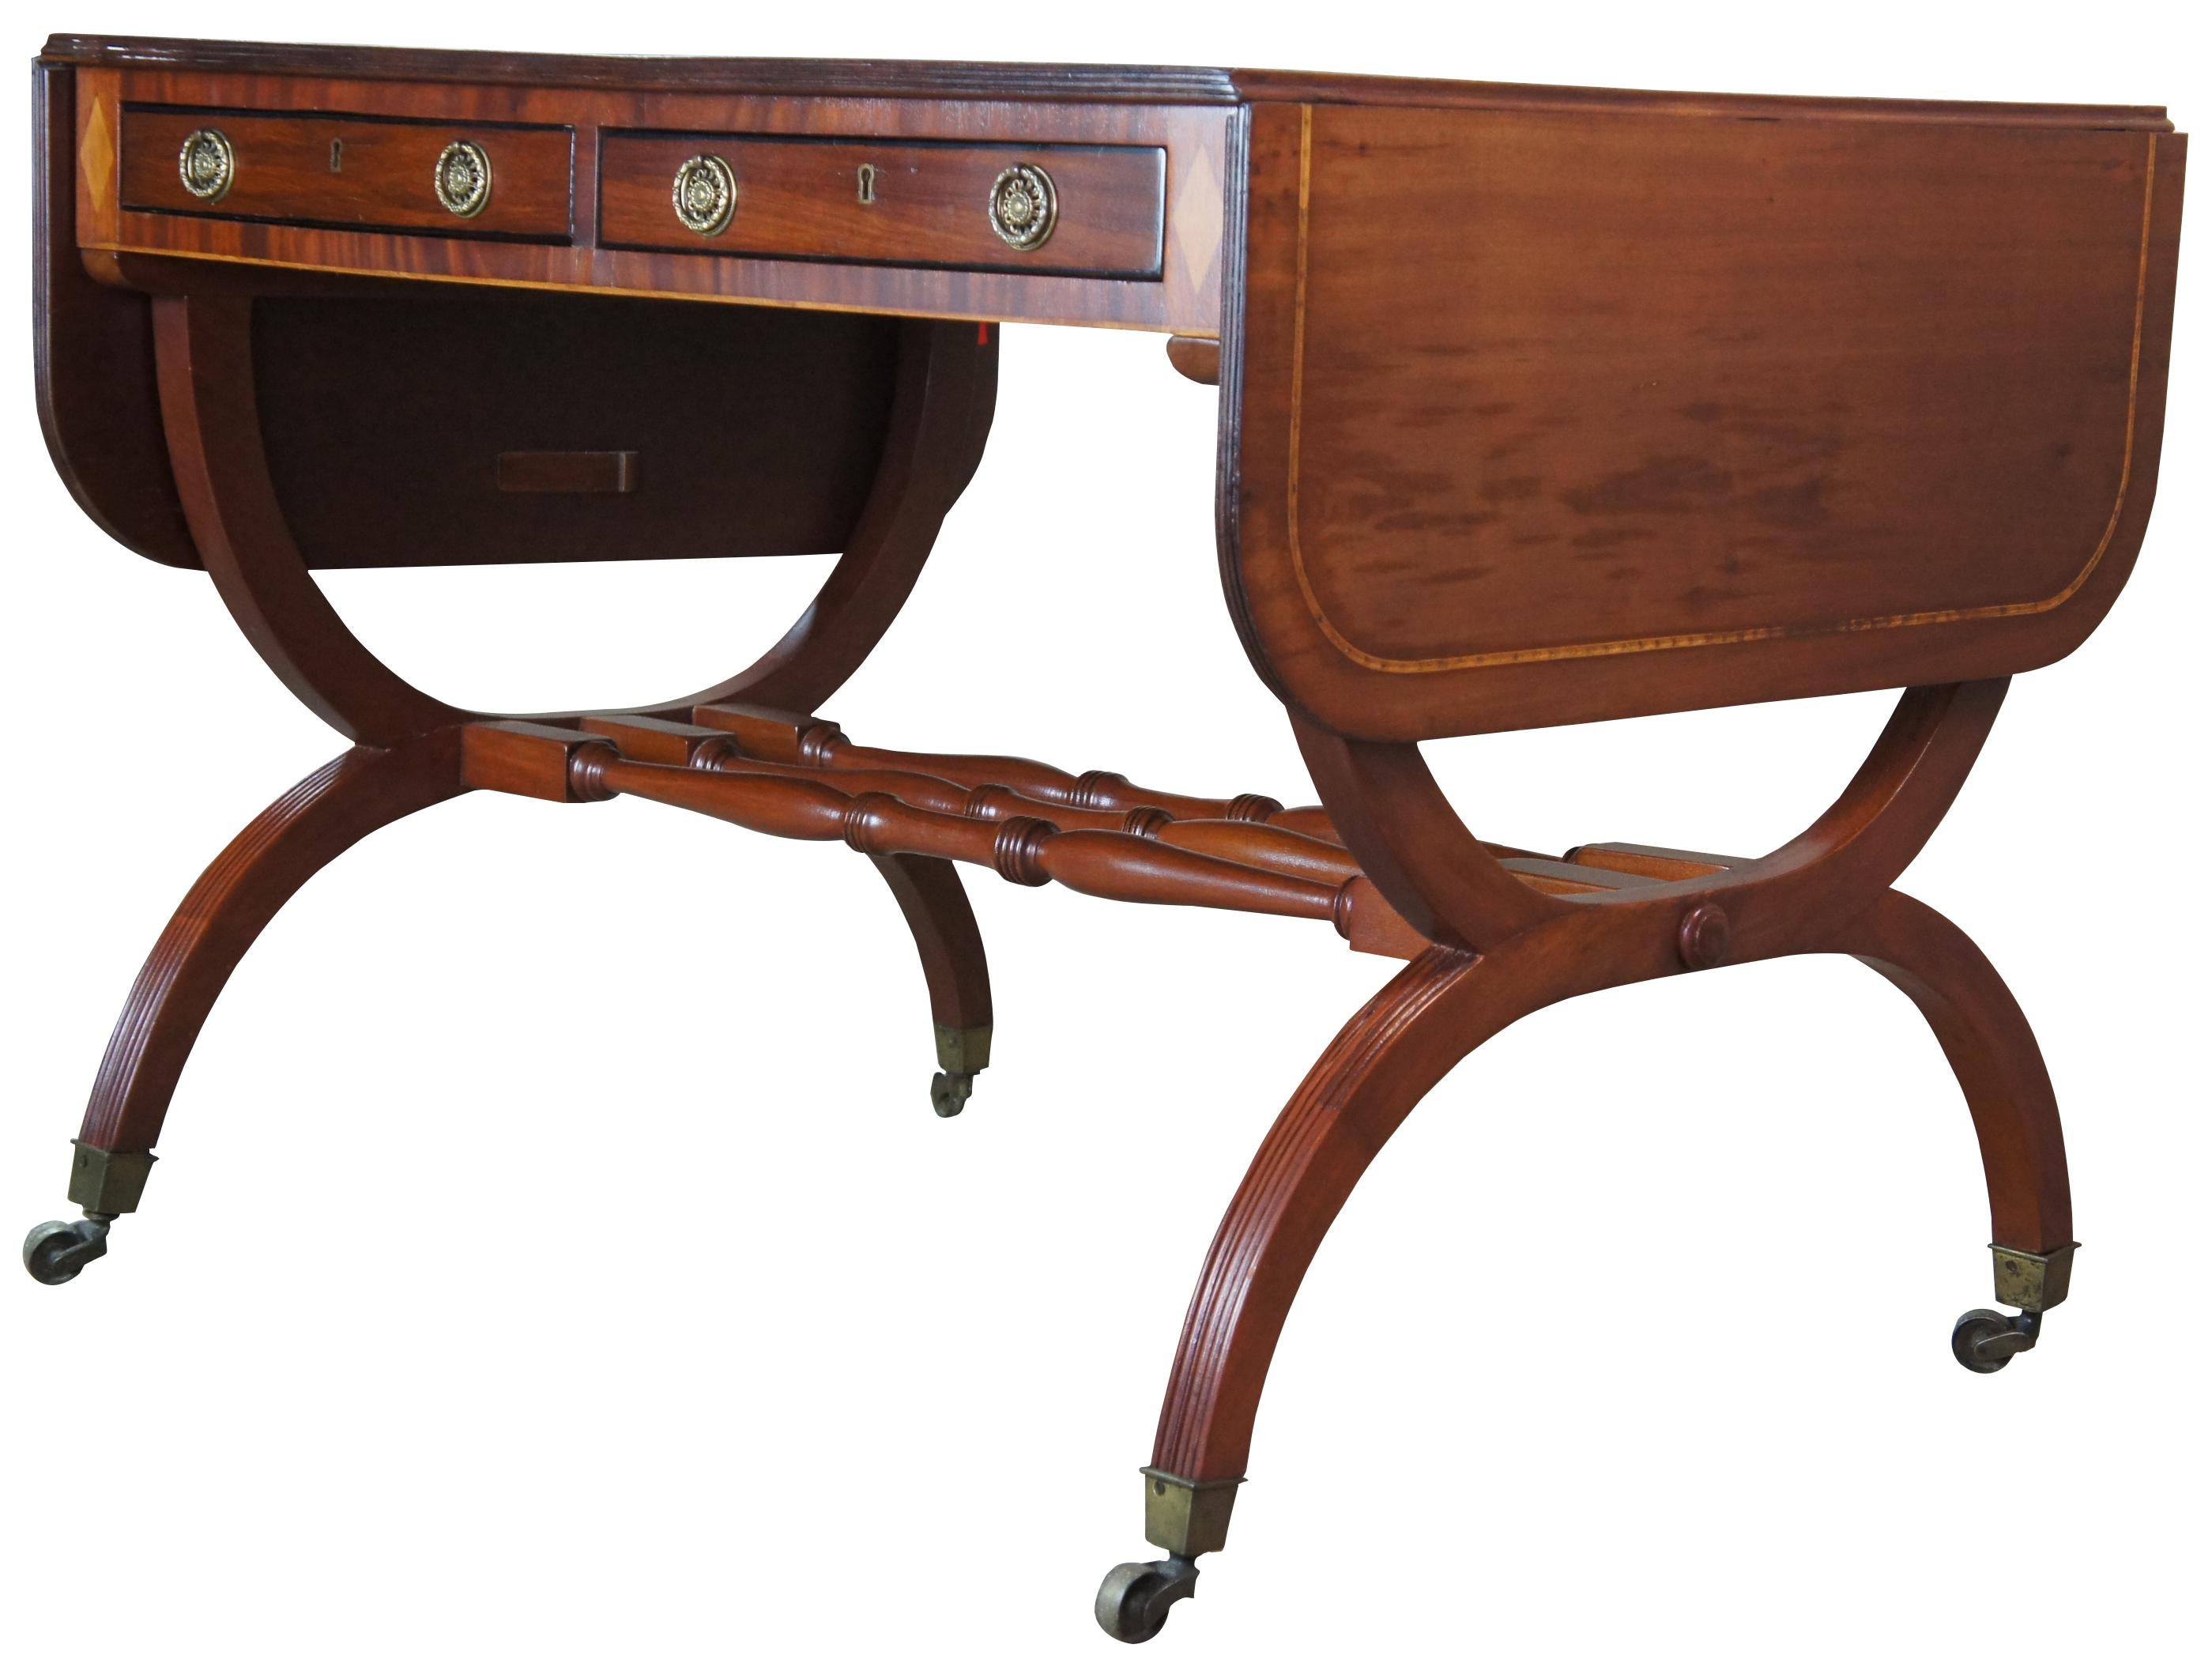 A fine English Regency drop leaf library desk or sofa table, circa early 19th century. Rectangular in form featuring diamond shaped inlay, yew banding, ebonized drawer fronts and brass hardware. Includes two long hand dovetailed drawers with brass